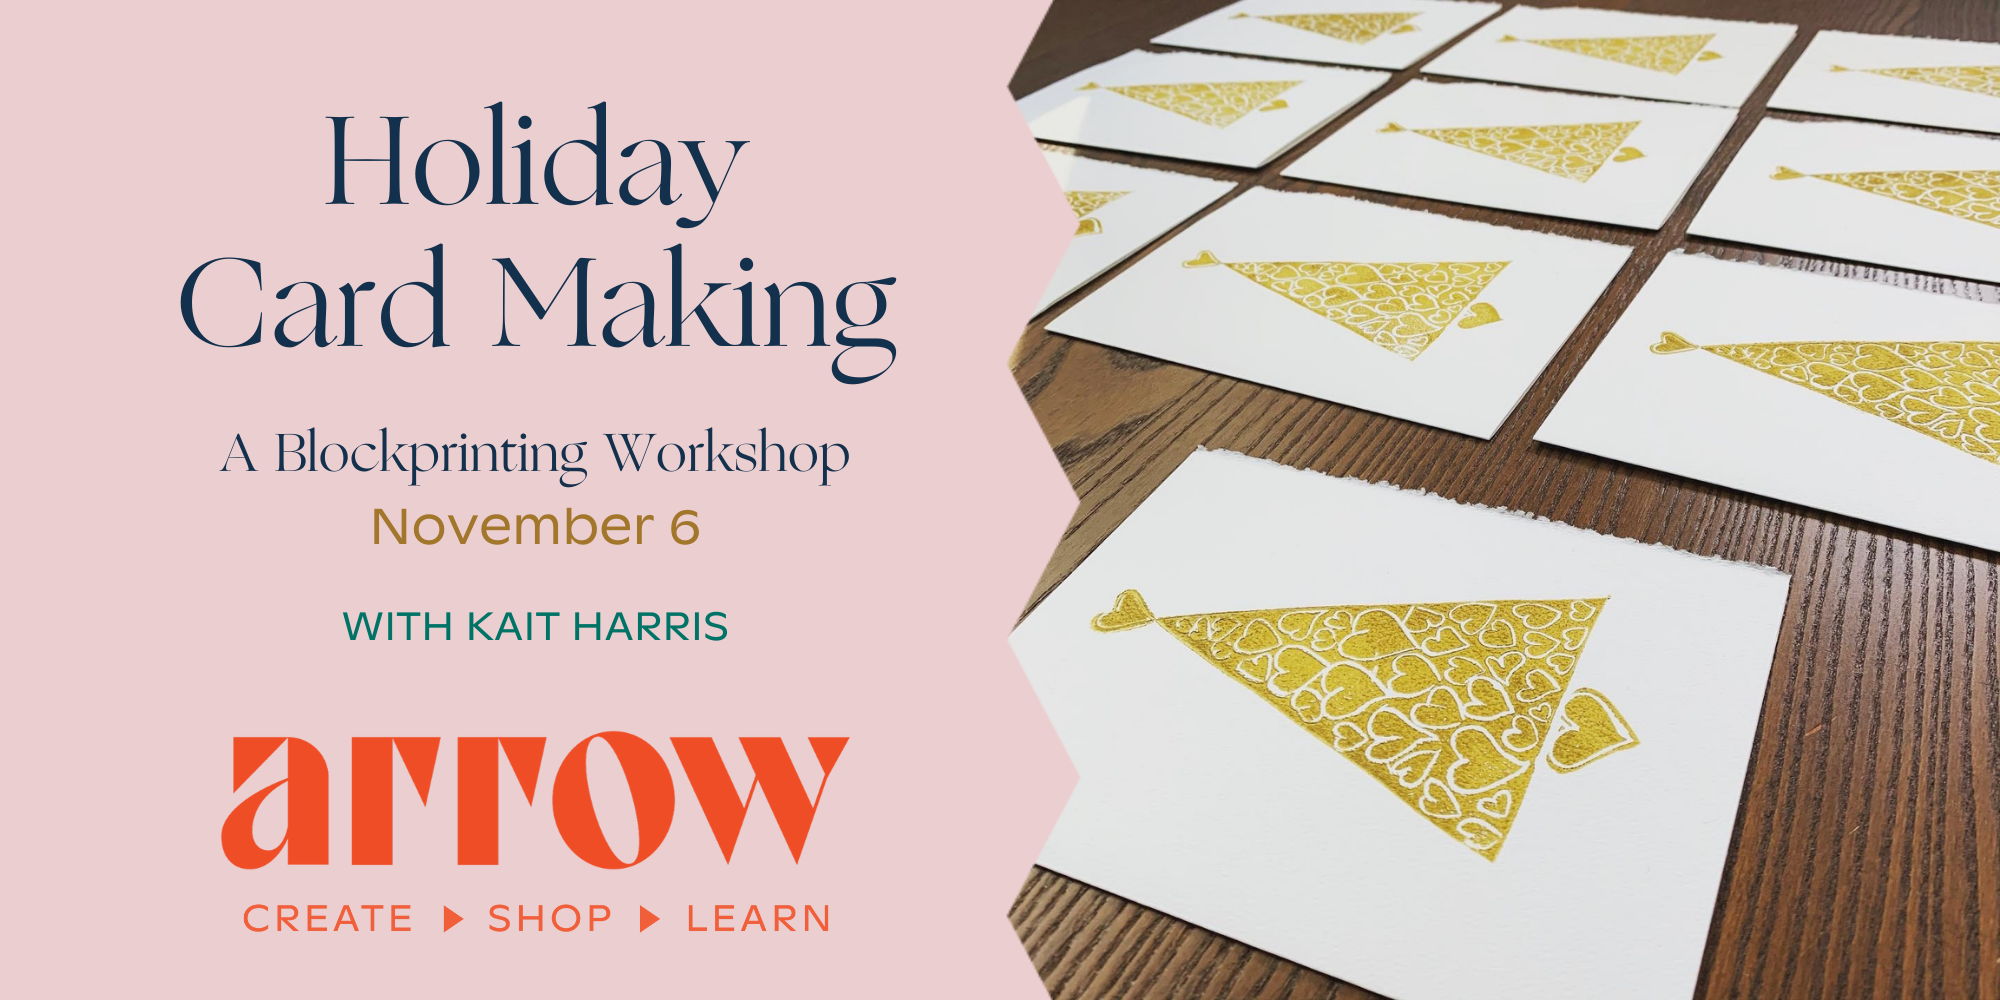 Holiday Card Making with Kait Harris promotional image